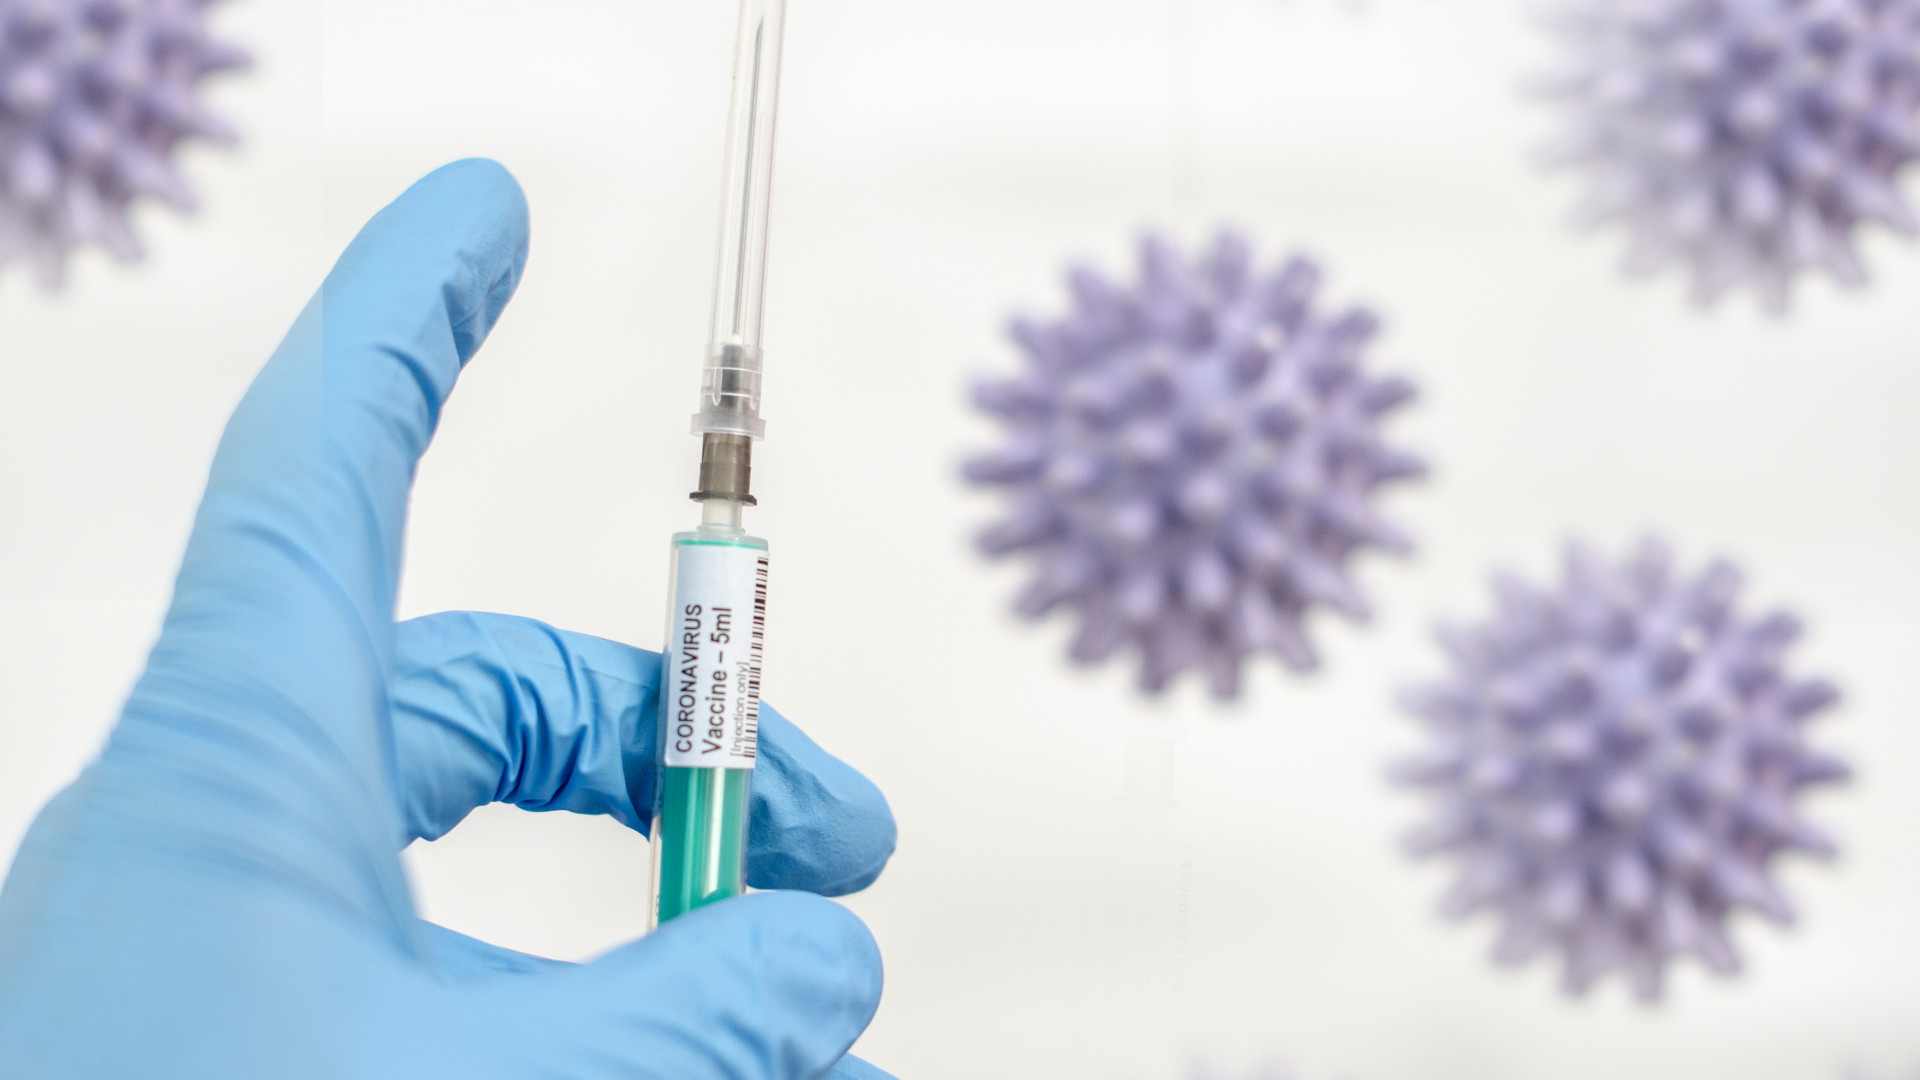 Recent research indicates that the Pfizer-BioNTech vaccine is highly effective against mutations